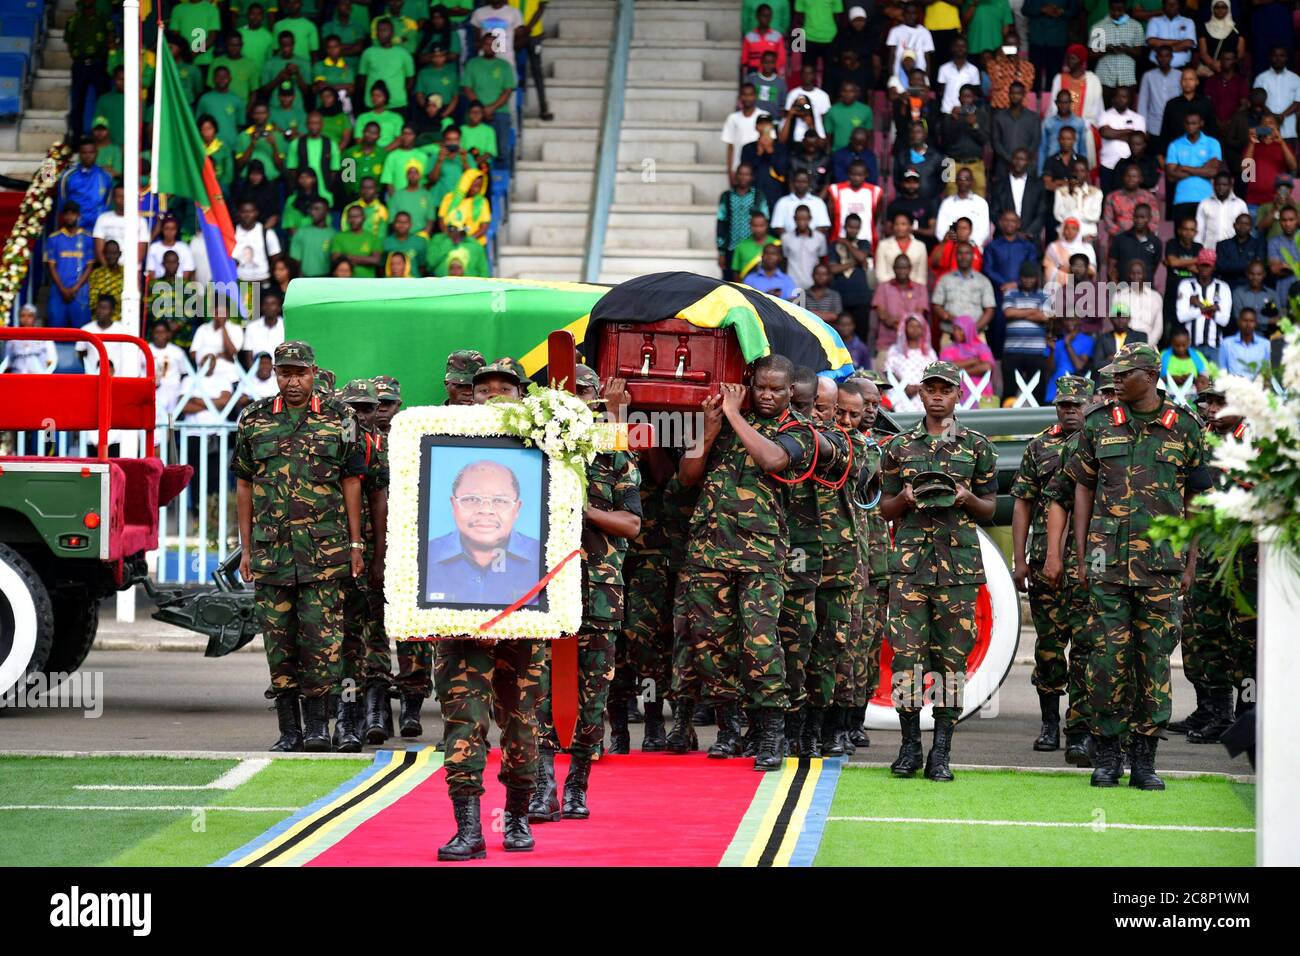 (200726) -- DAR ES SALAAM, July 26, 2020 (Xinhua) -- Soldiers carry the casket of the late former president Benjamin Mkapa at Uhuru stadium in Dar es Salaam, Tanzania, July 26, 2020. Tanzania's former president Benjamin Mkapa died on Friday at the age of 81. (Tanzanian State House/Handout via Xinhua) Stock Photo